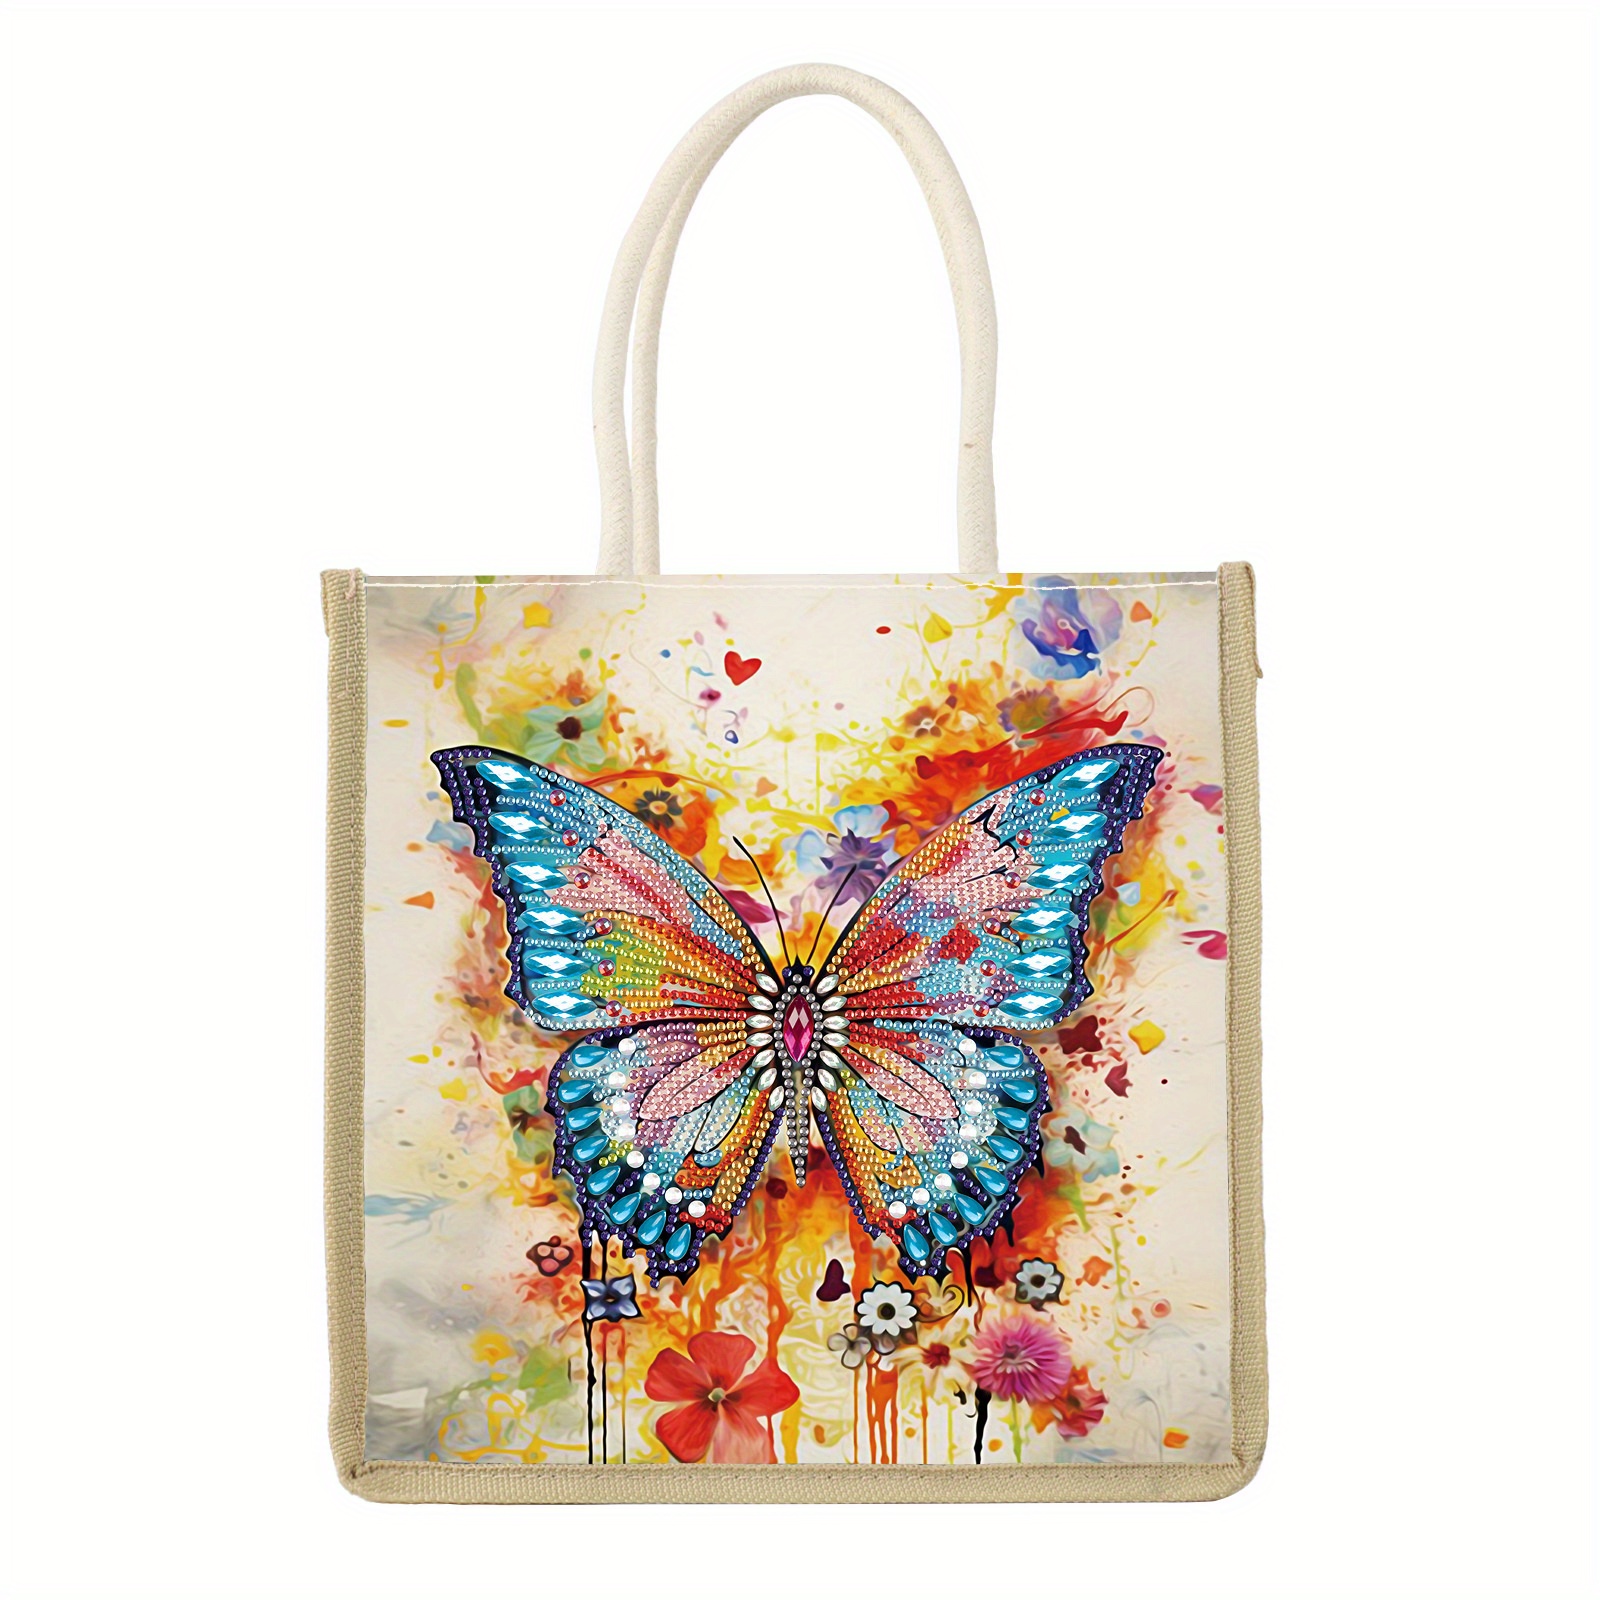 

1pc Canvas Diamond Art Painting Tote Bag, Diy Diamond Art Bags, Stitch Gift Bag, Reusable Grocery Bags, Canvas Diamond Art Painting Shopping Bags (butterfly, 10.2 X 10.4 In)